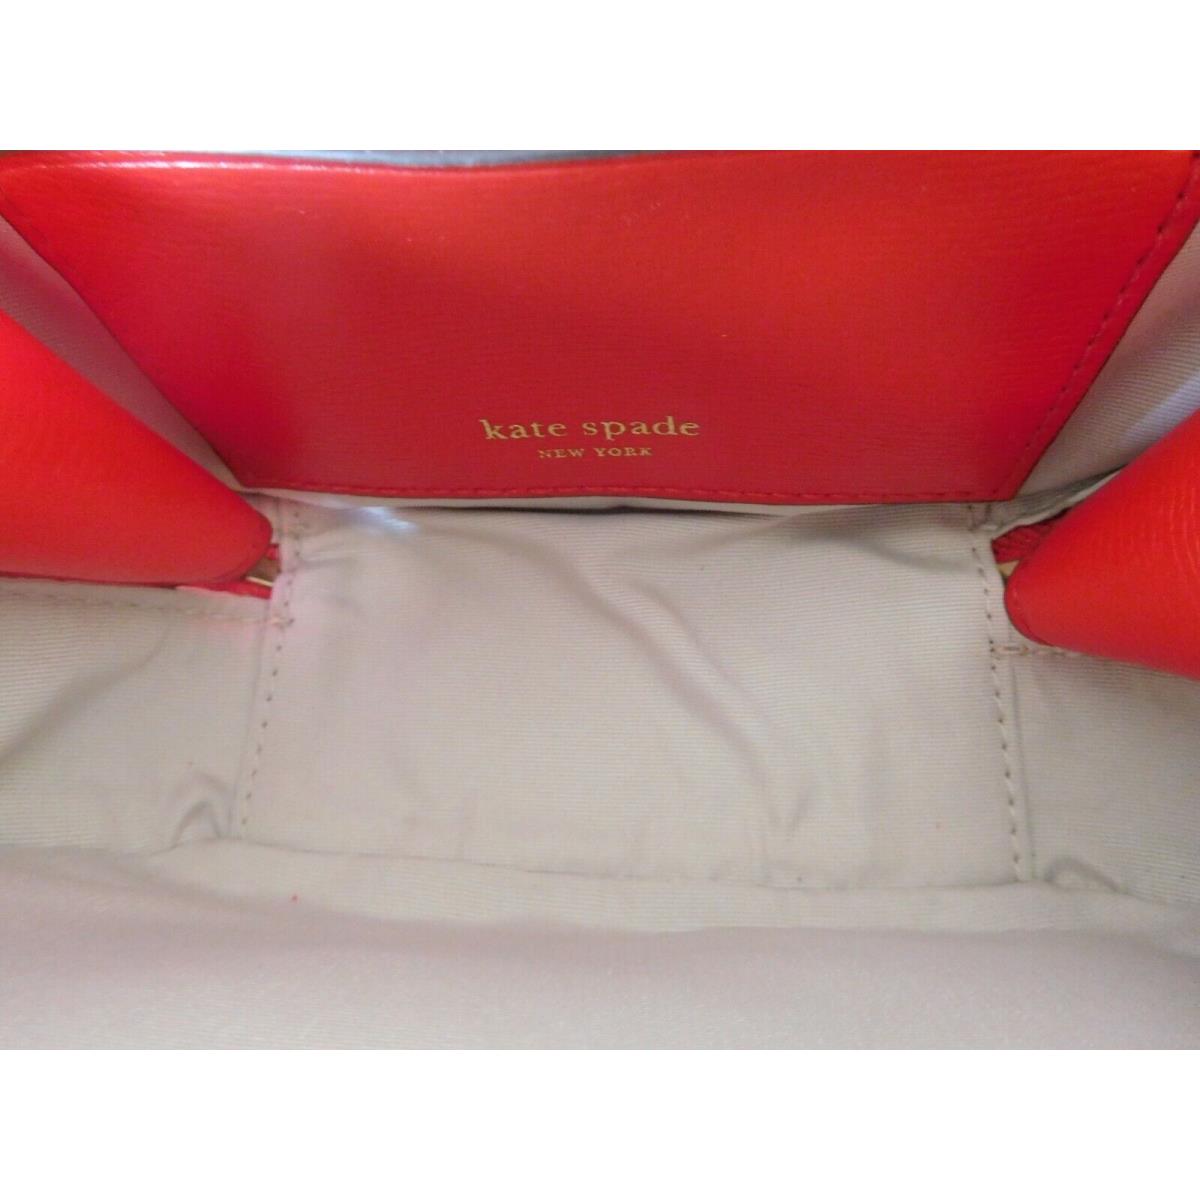 Kate Spade New York x Tom and Jerry Canteen Crossbody Bag - Red